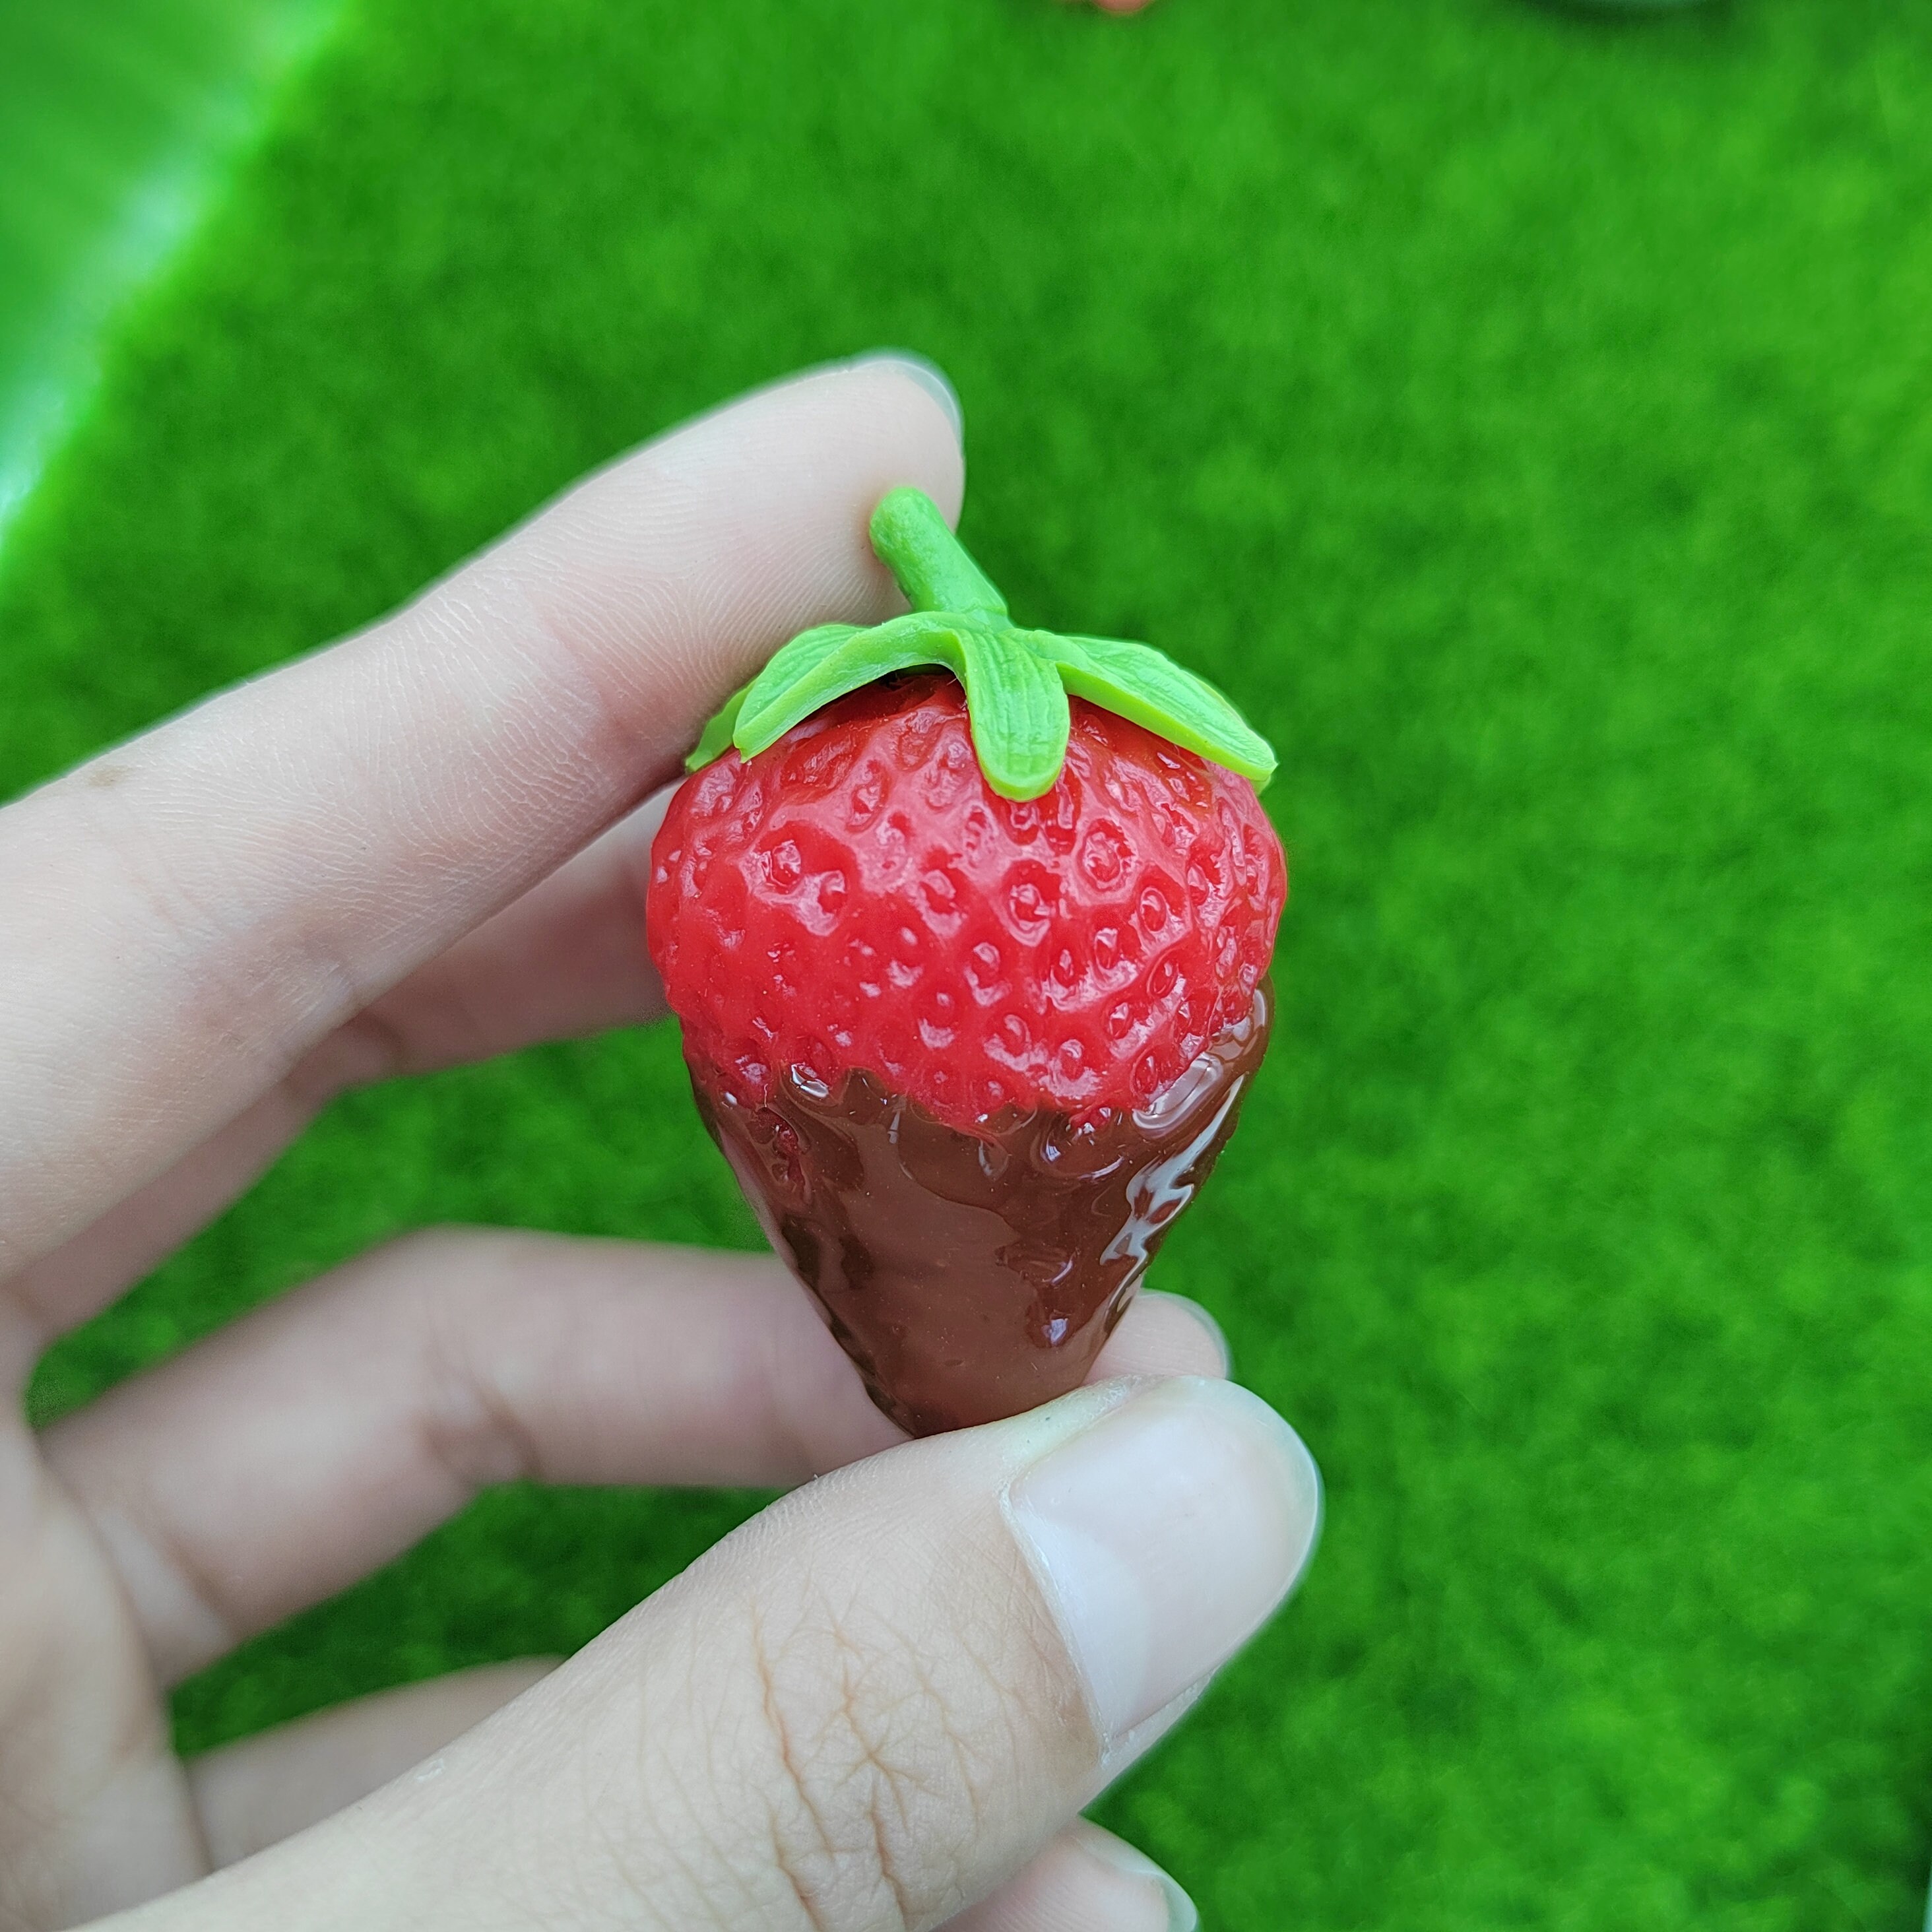 3D strawberry mold real size strawberry #strawberry chocolate mold, embed  mold wax tart mold, berry fruit mold, cupcake top